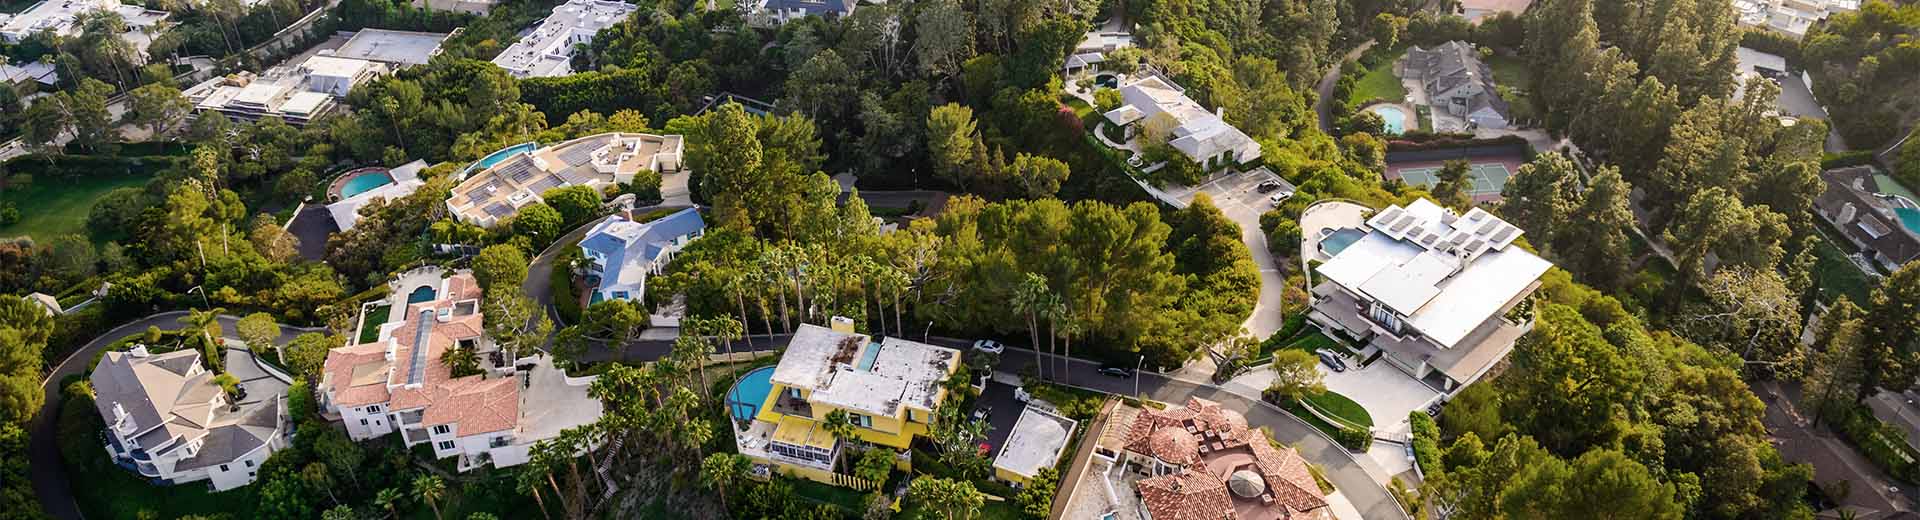 Aerial view of Beverly Hills, with mansions and large green gardens.